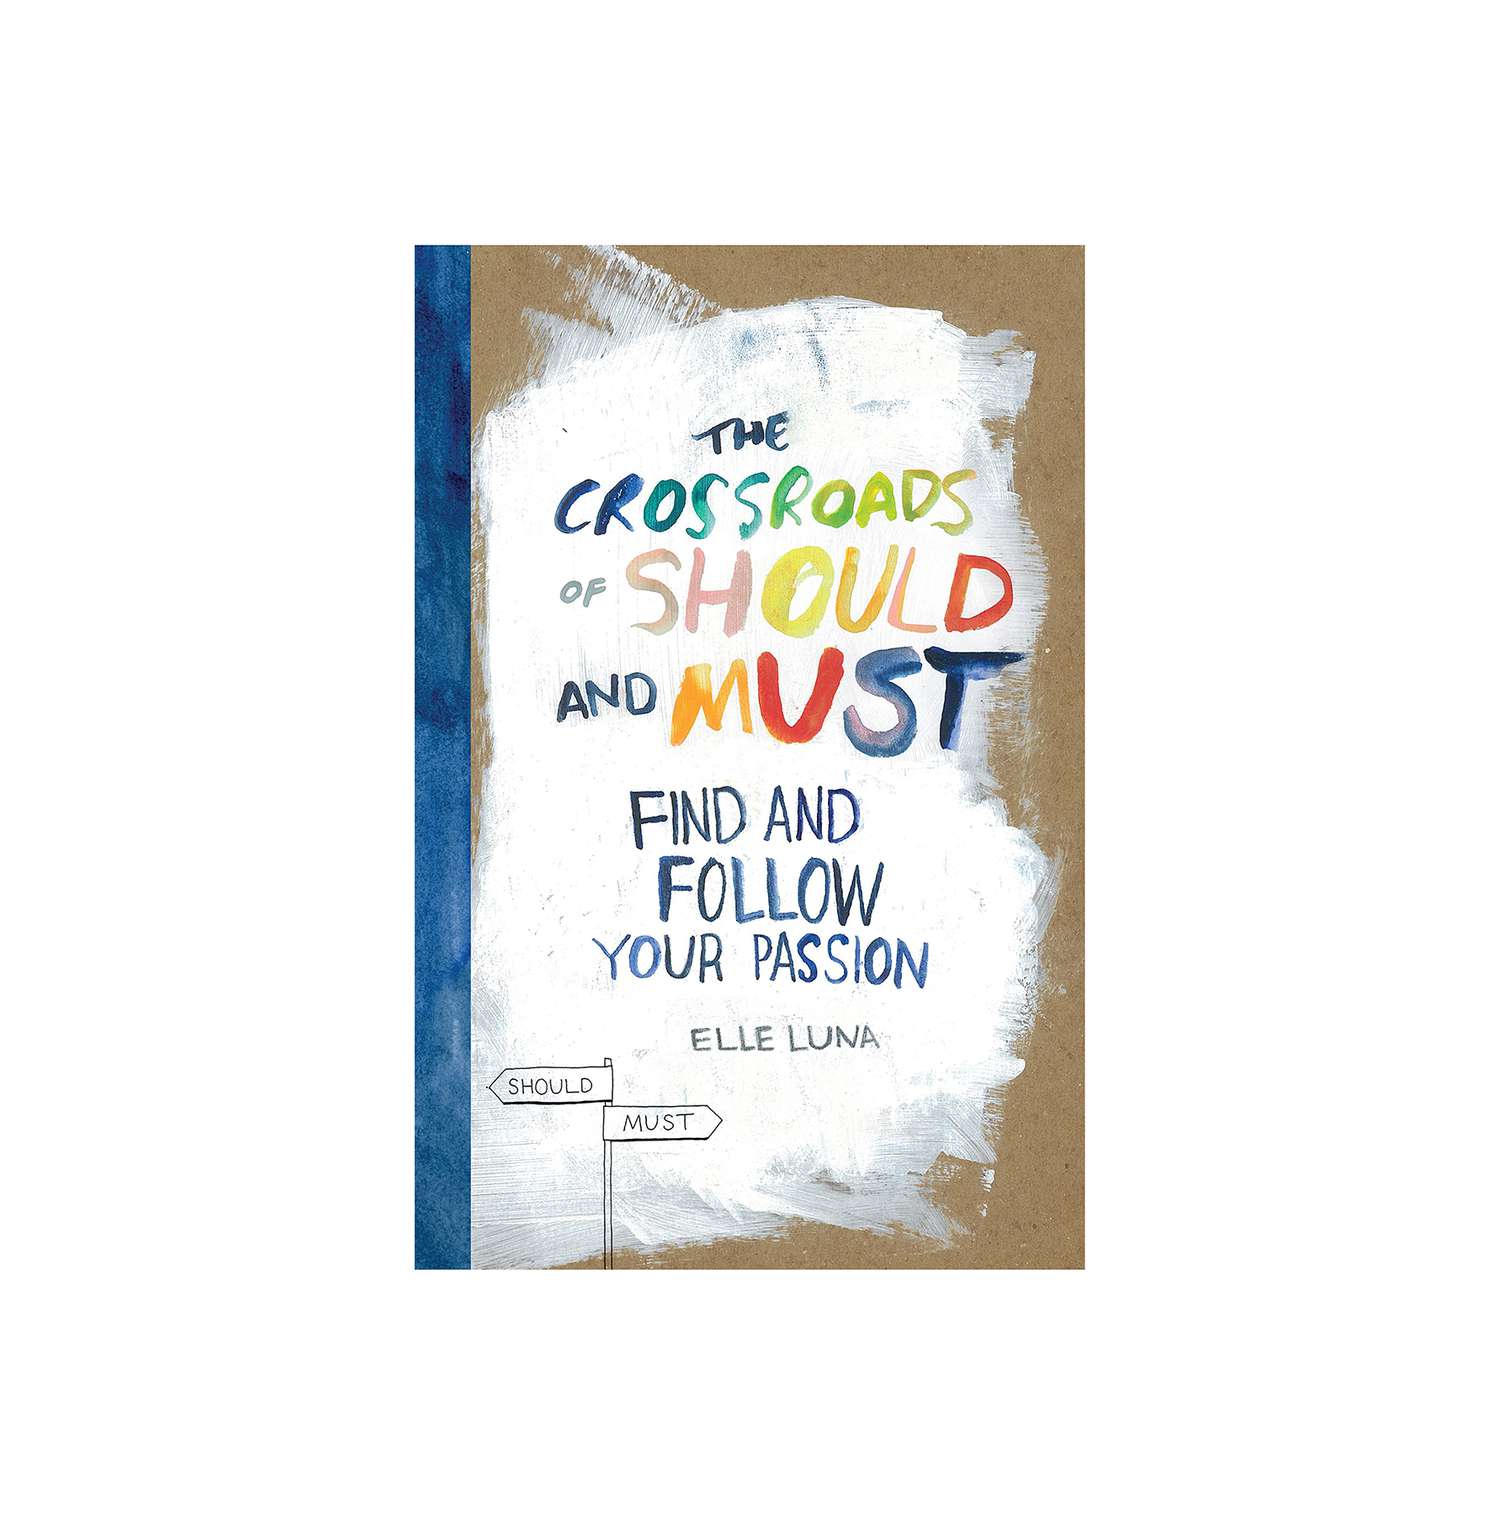 The Crossroads of Should and Must: Find and Follow Your Passion, by Elle Luna